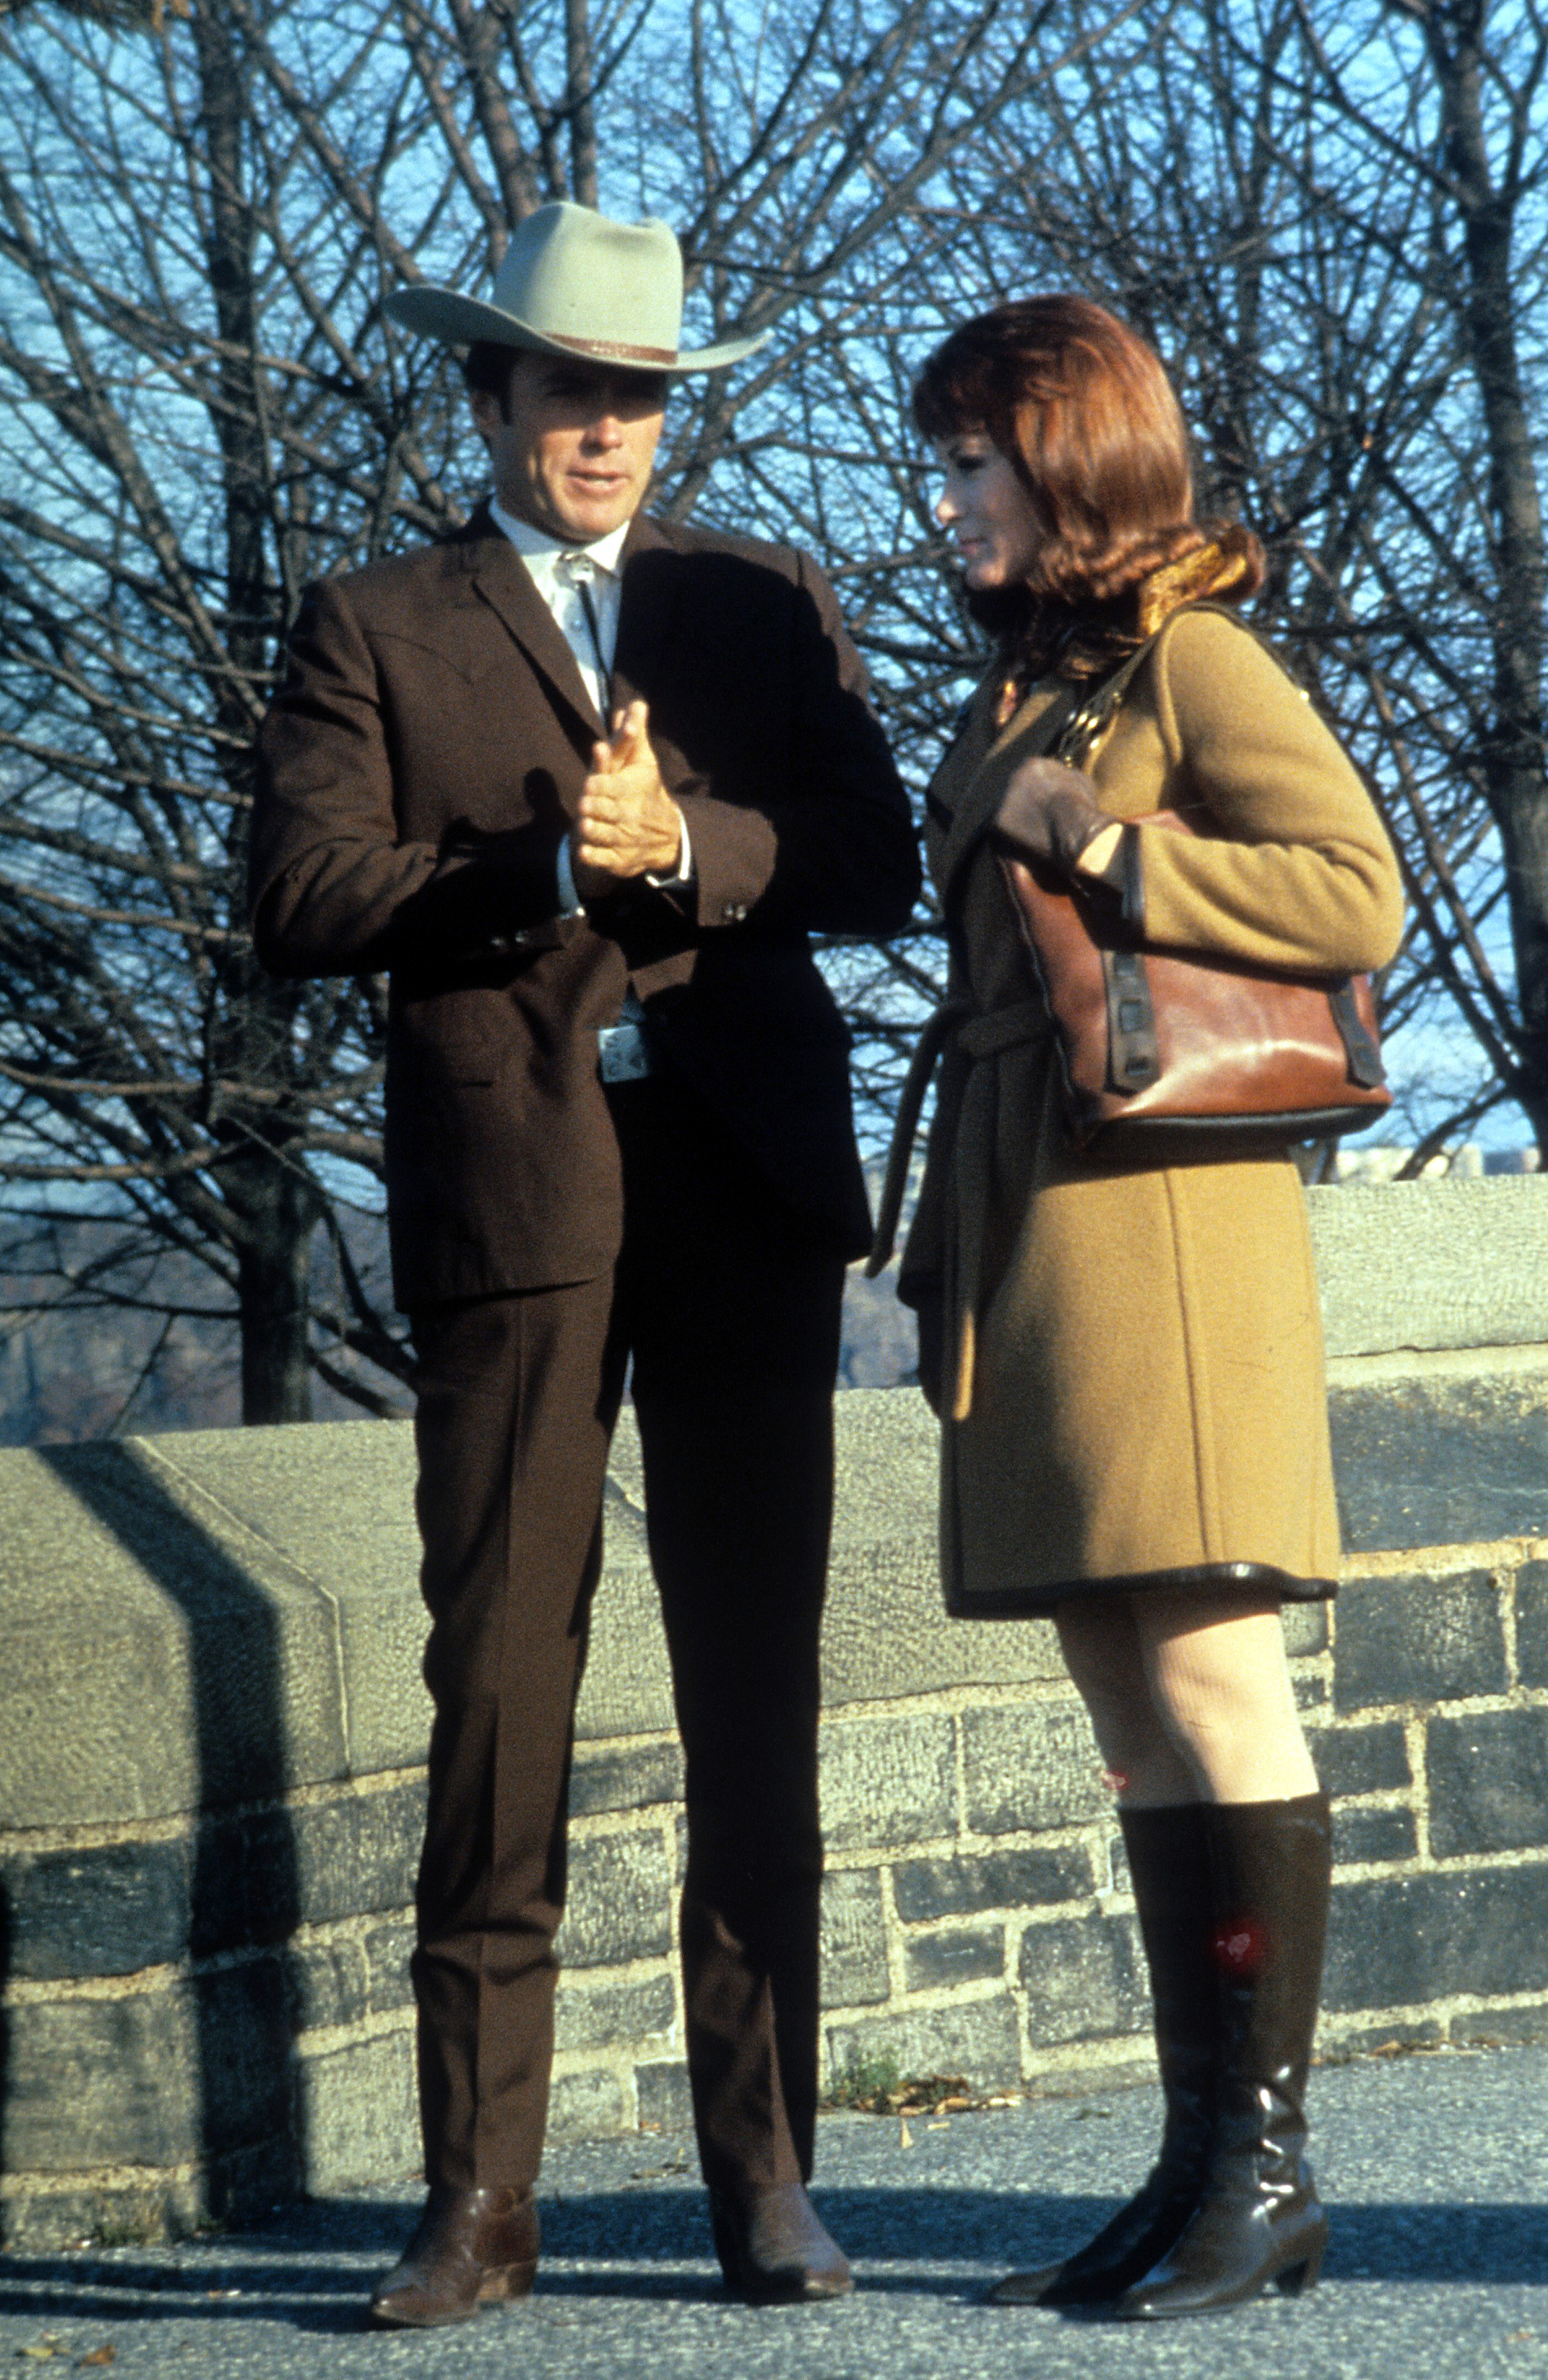 Still of Clint Eastwood and Susan Clark in Coogan's Bluff (1968)